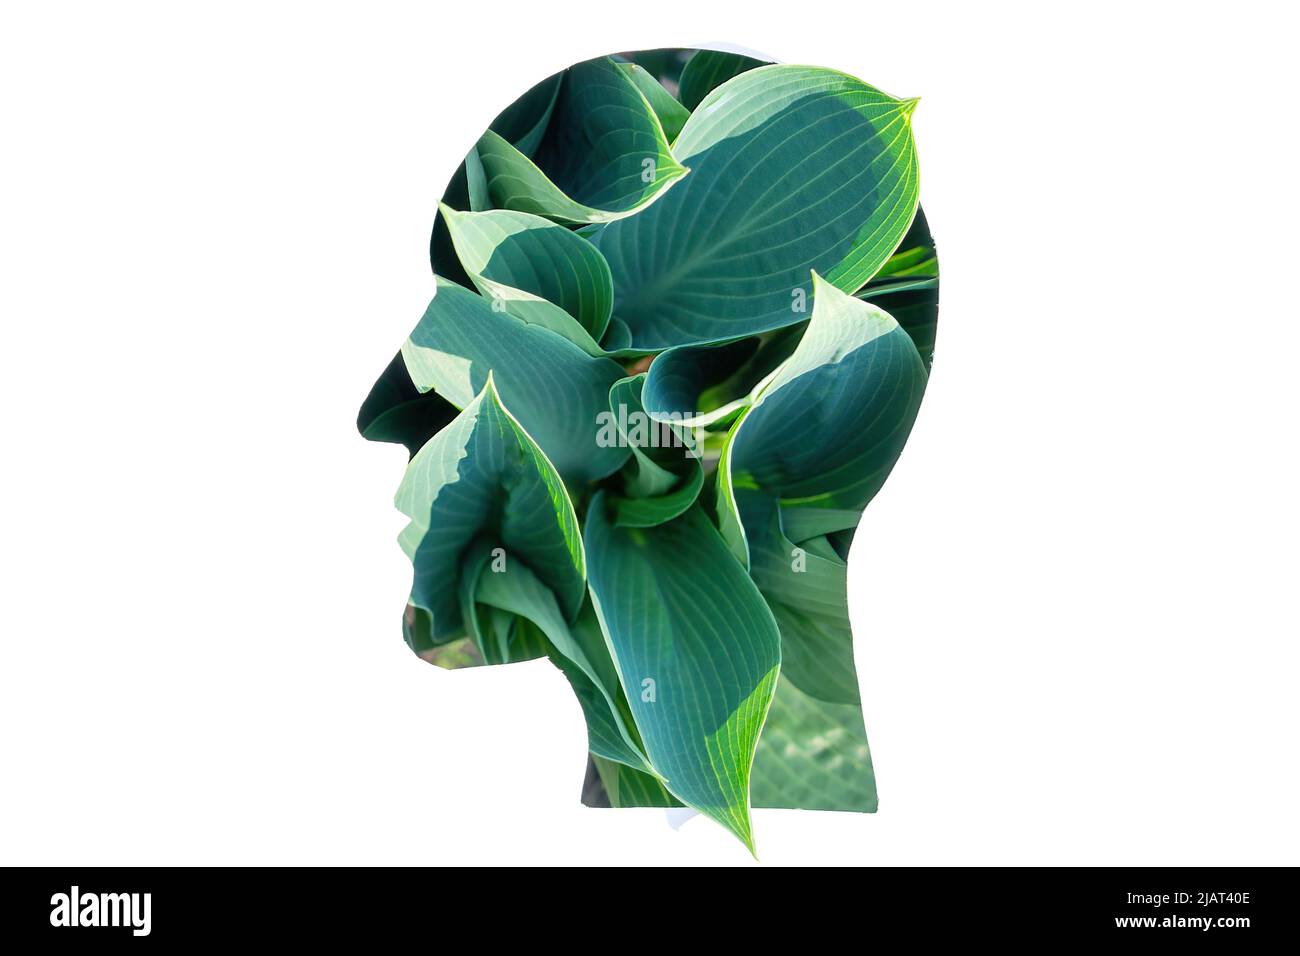 Plant leaves coming through a man's head profile paper cut-out with copy space. Stock Photo